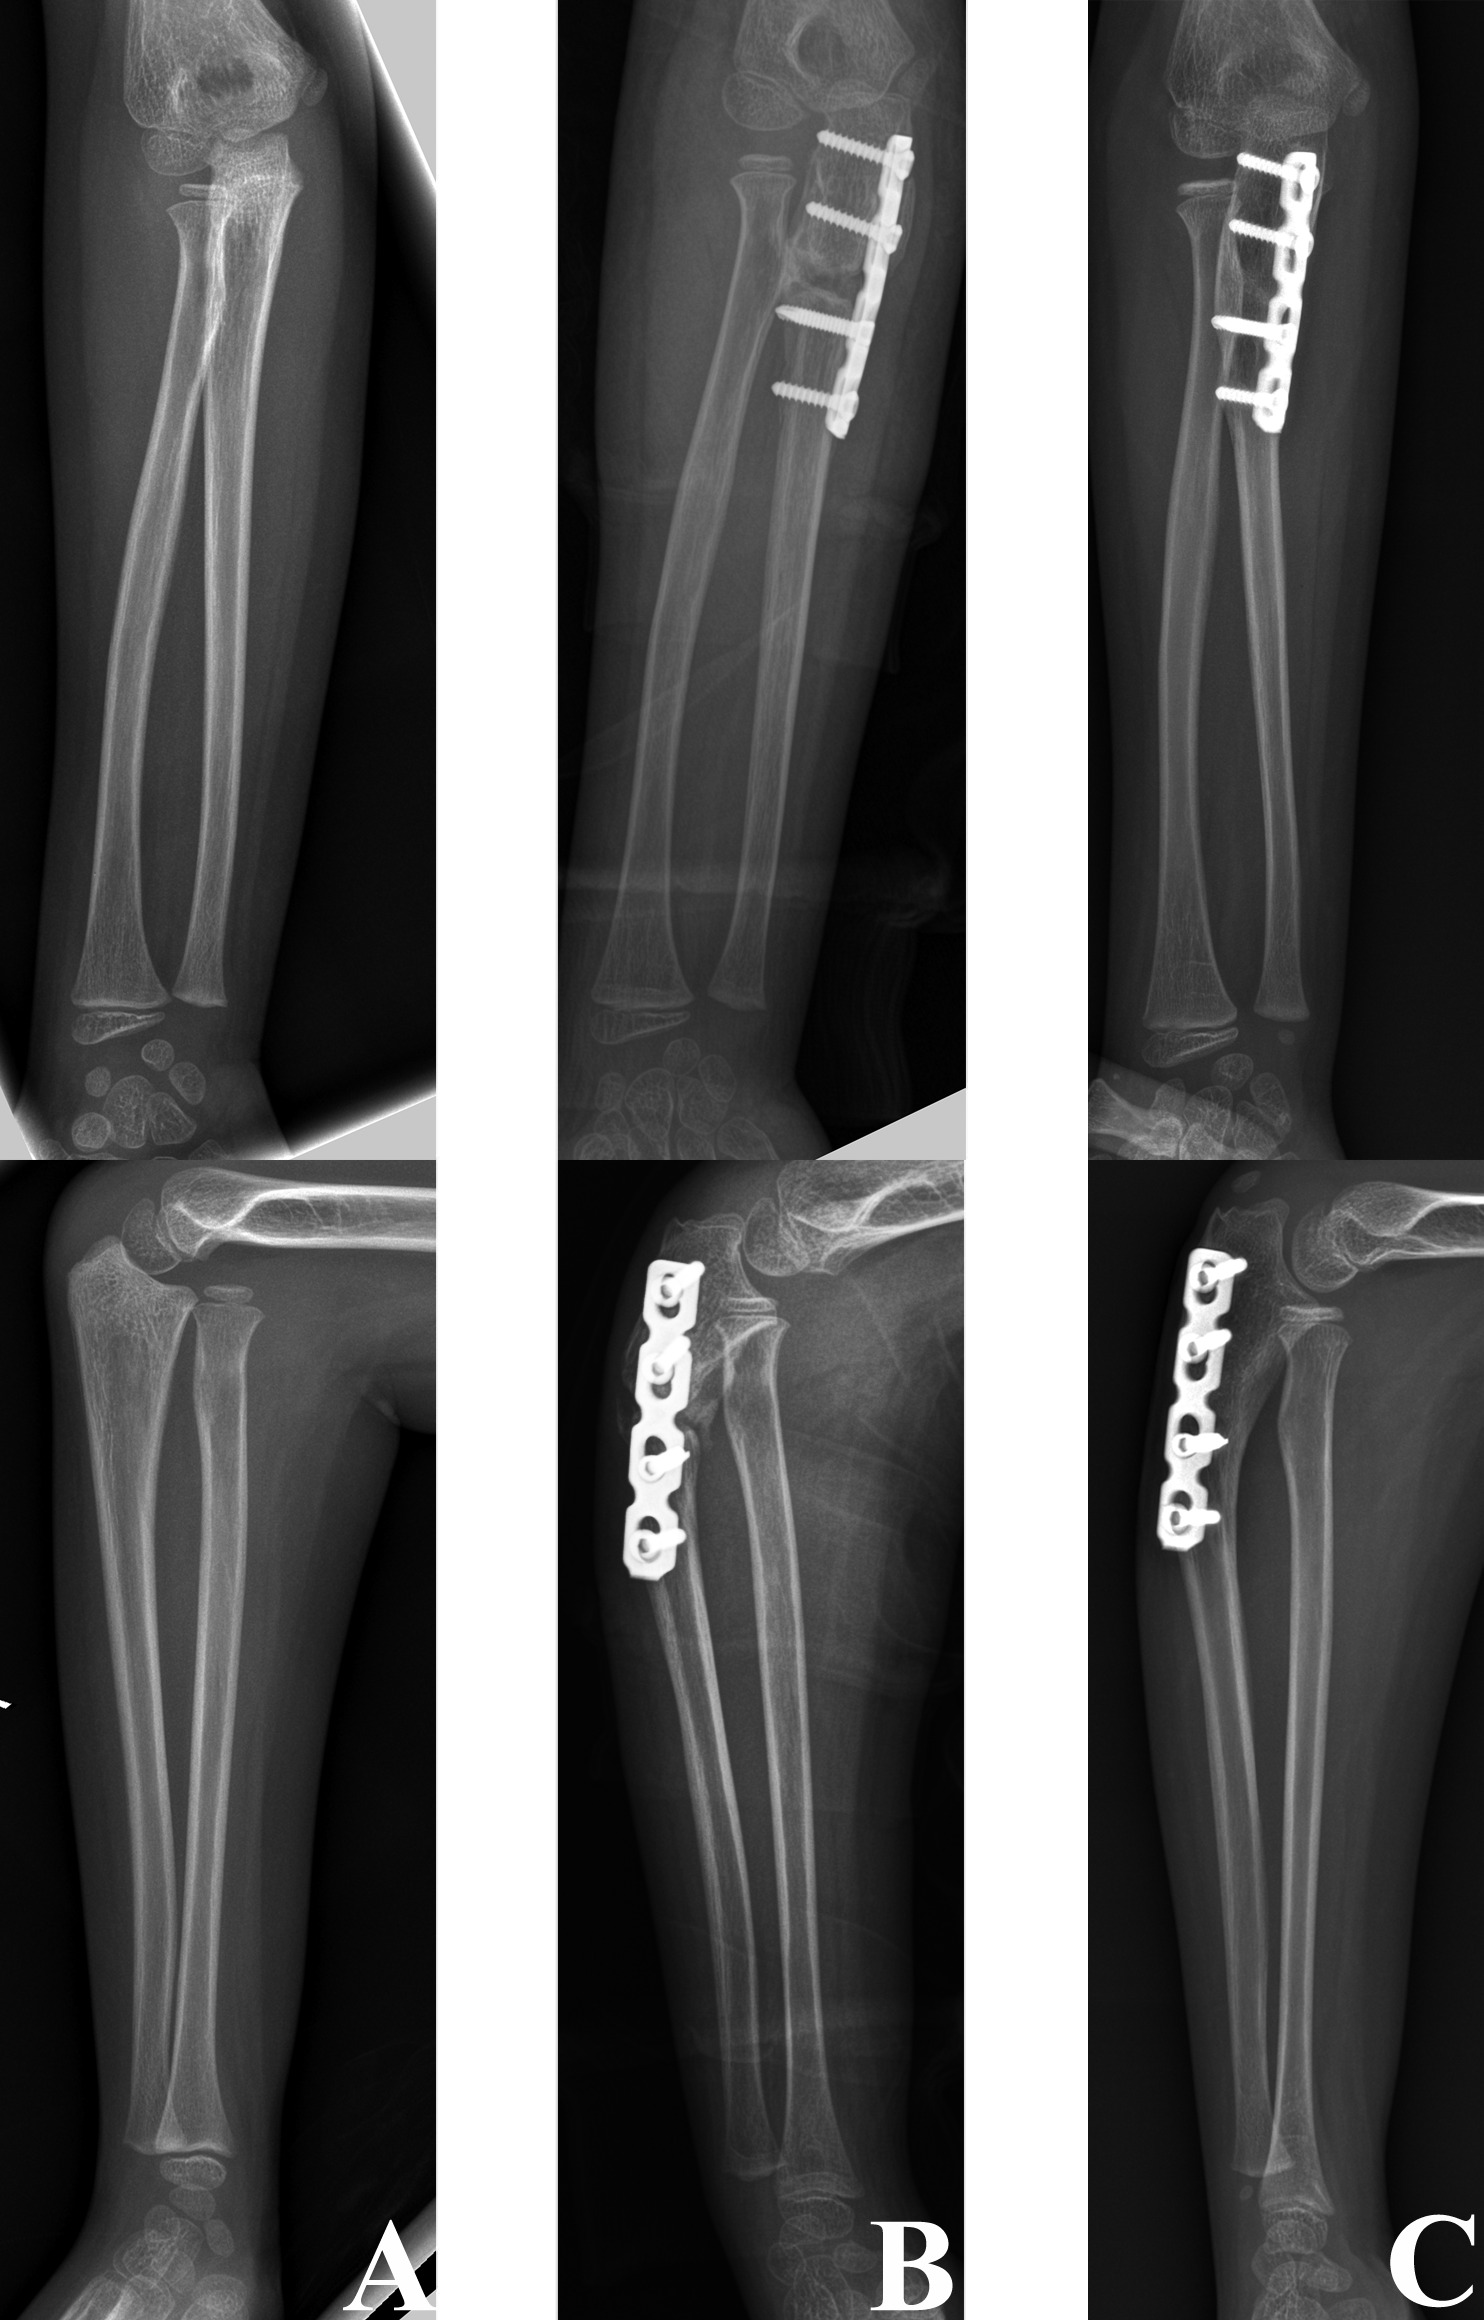 Fig. 7 
          a) Anteroposterior and lateral radiographs of a six-year-old female with a chronic Monteggia fracture with an interval of 1.5 months between injury and surgery. b) Anteroposterior and lateral radiographs after open reduction and fixation of the ulna osteotomy with plate and screws. c) Anteroposterior and lateral radiographs performed at 17-month follow-up showing the reduced radial head.
        